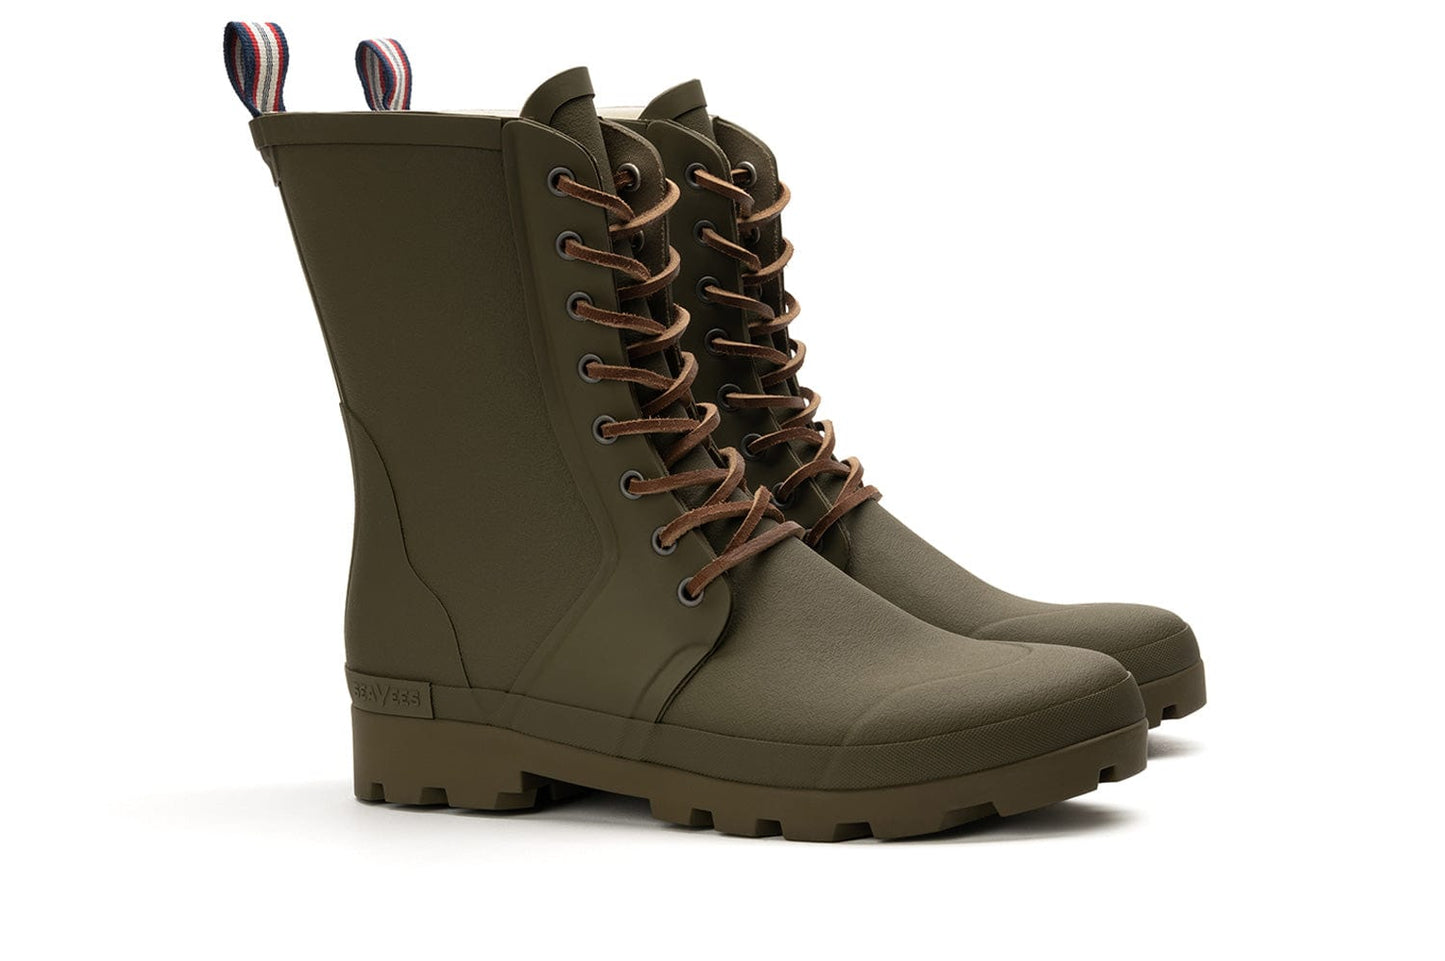 Mens - Marshall Boot - Military Olive